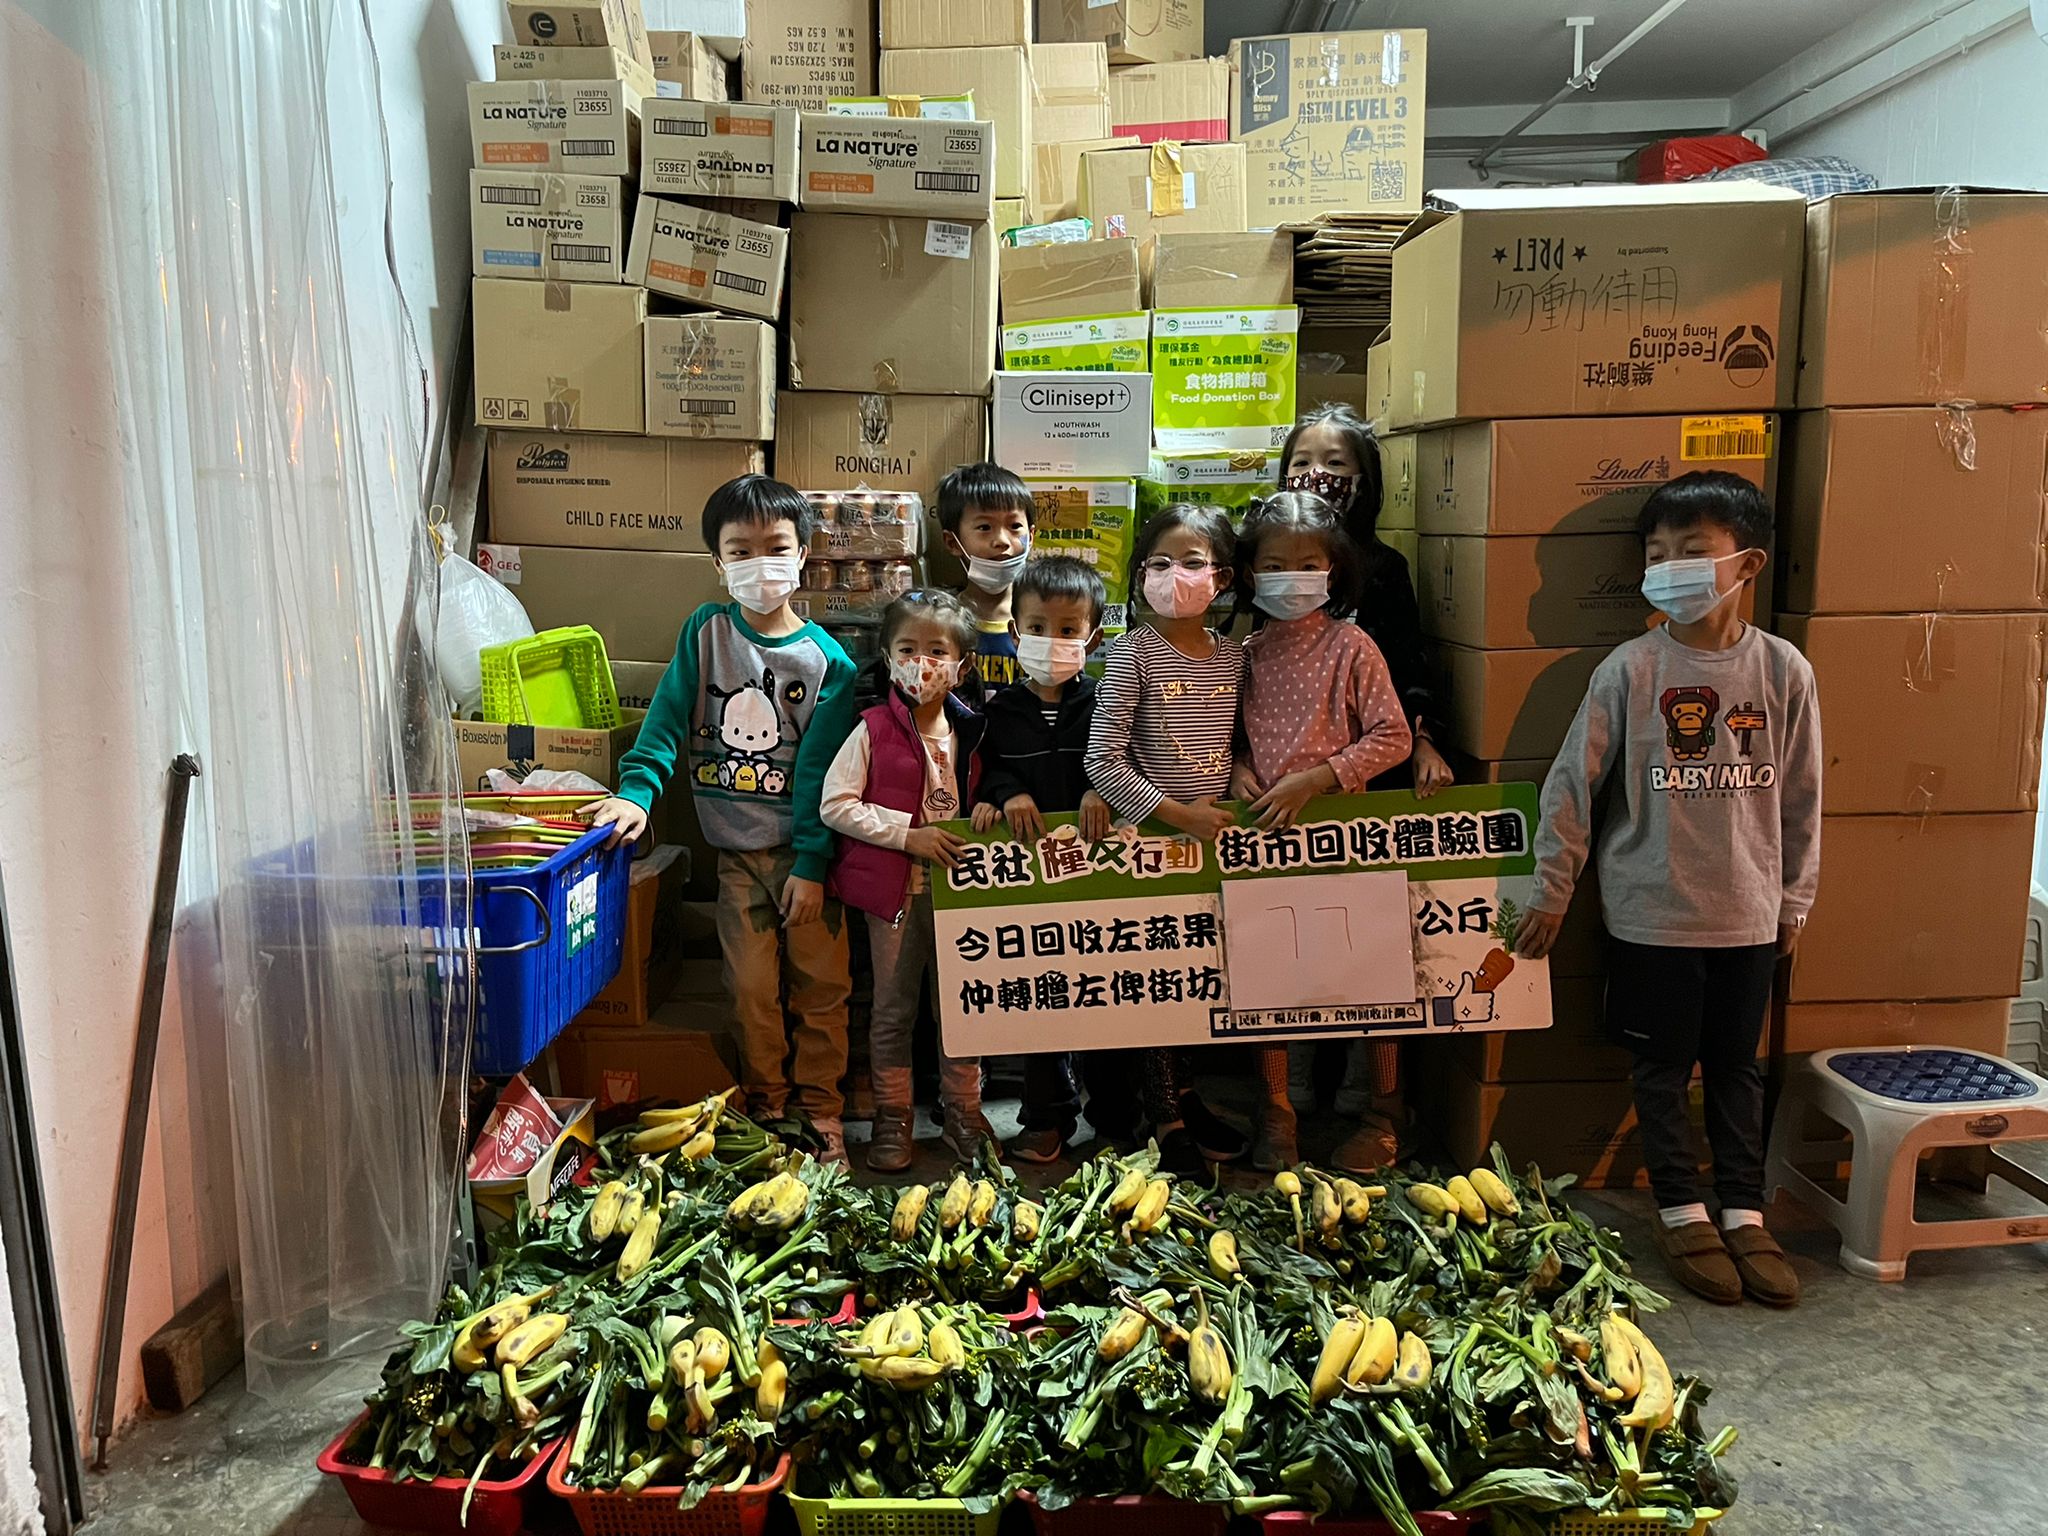 Vegetable Collection Trip: The collection experience was valuable to the kids, they feel satisfactory to help